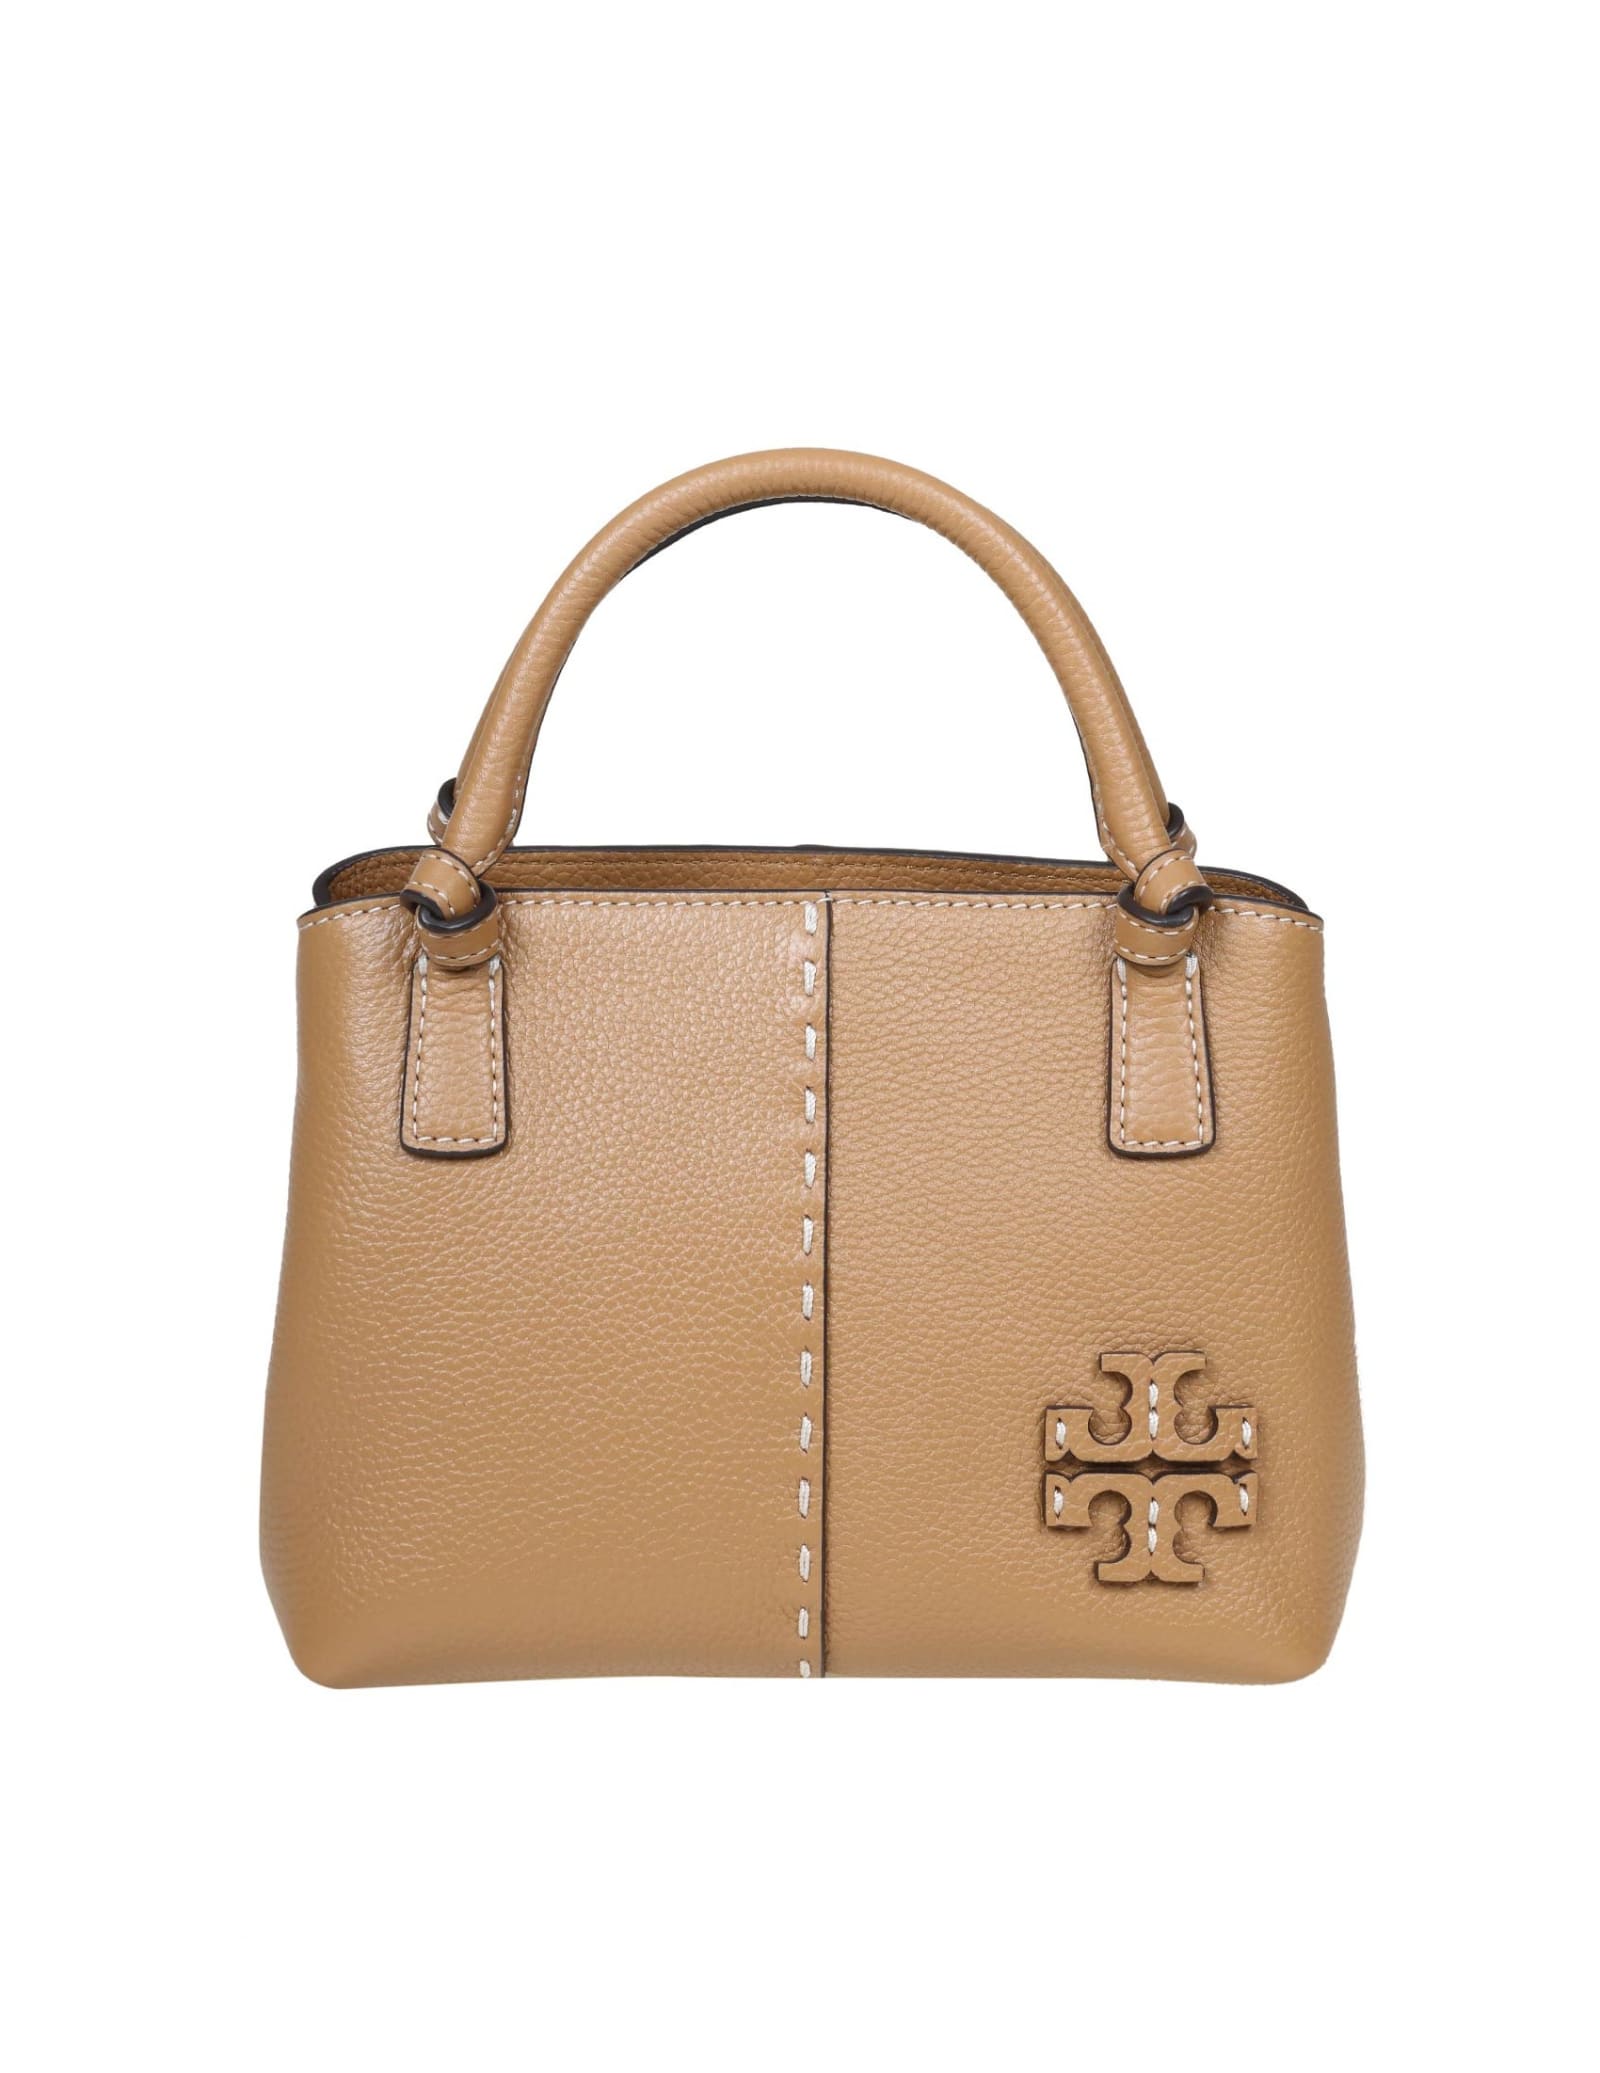 Tory Burch Mcgraw Mini Sacthel Bag In Beige Color Leather